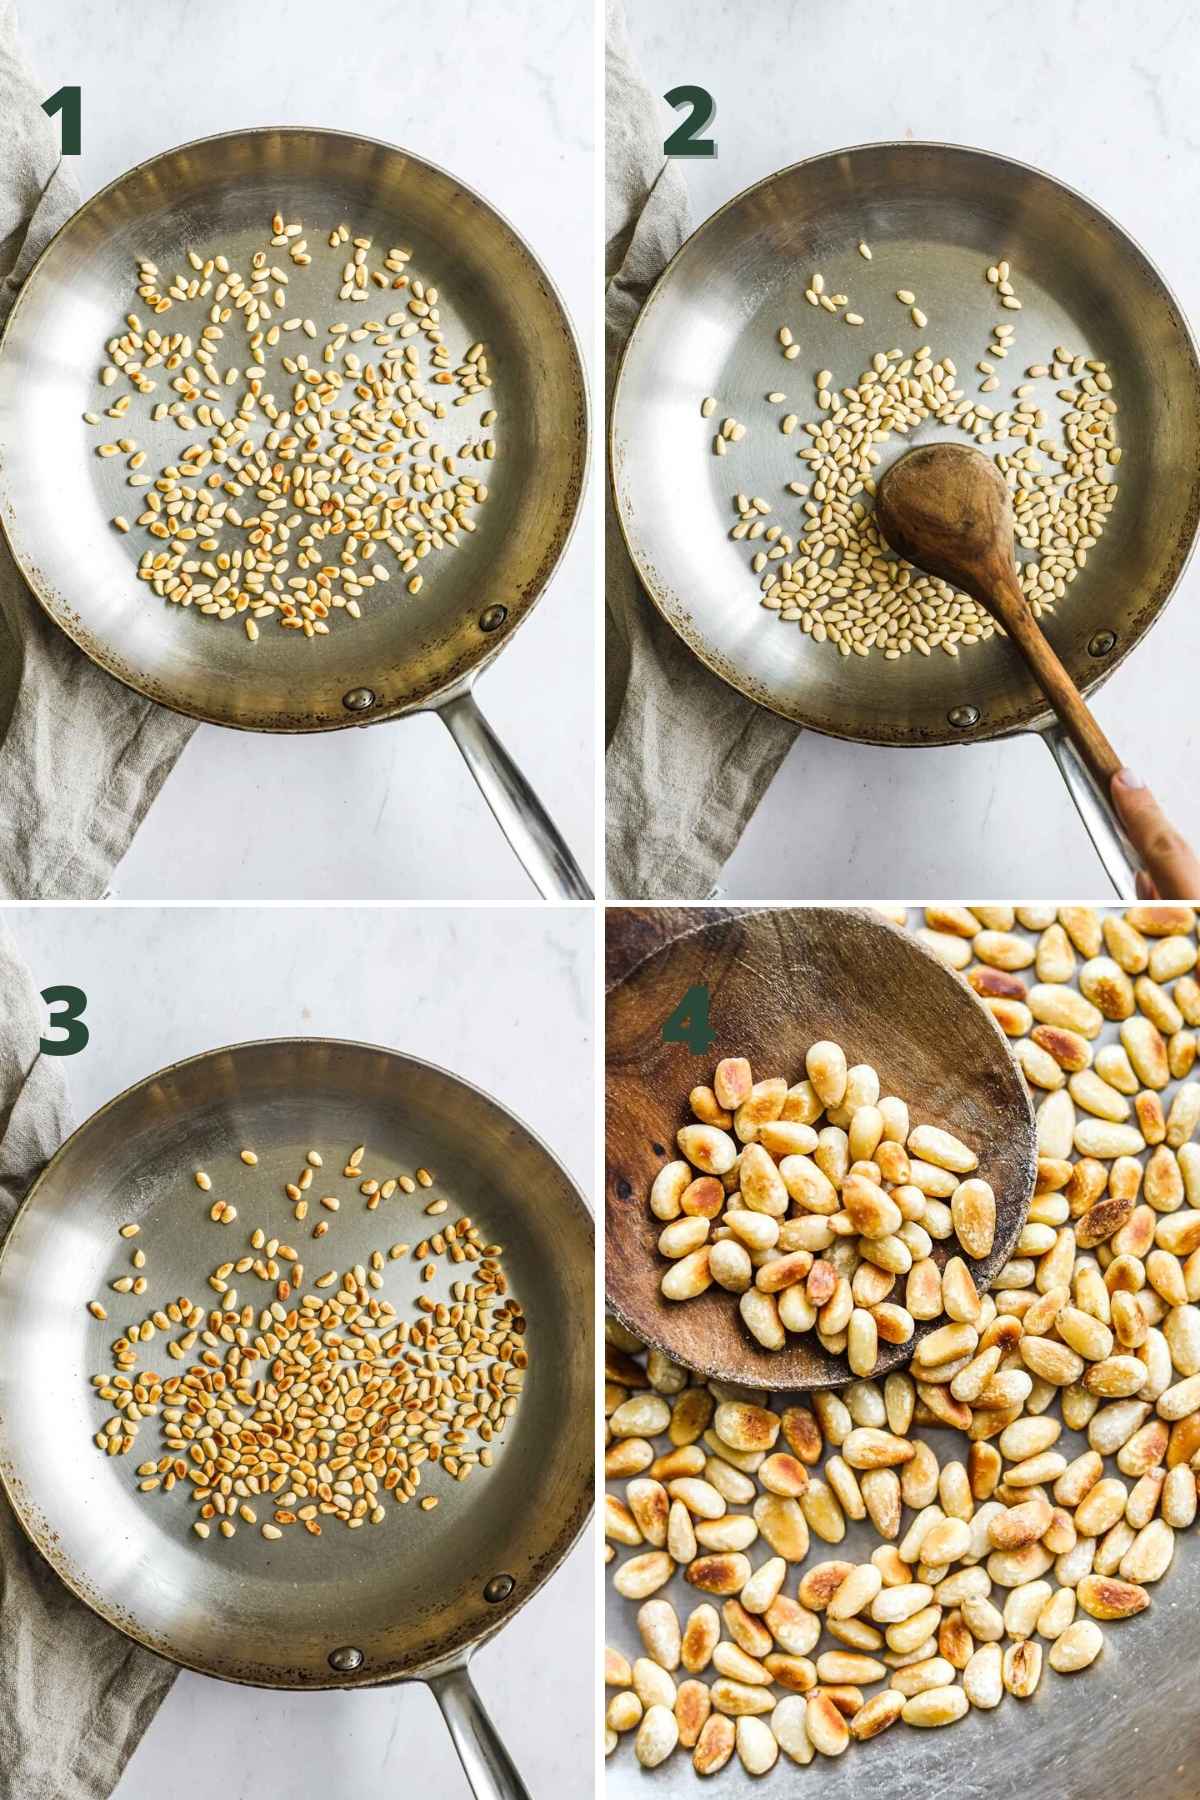 Steps to toast pine nuts (pinoli), including adding the raw pine nuts to a dry skillet, occasionally stirring, and lightly toasting until golden.